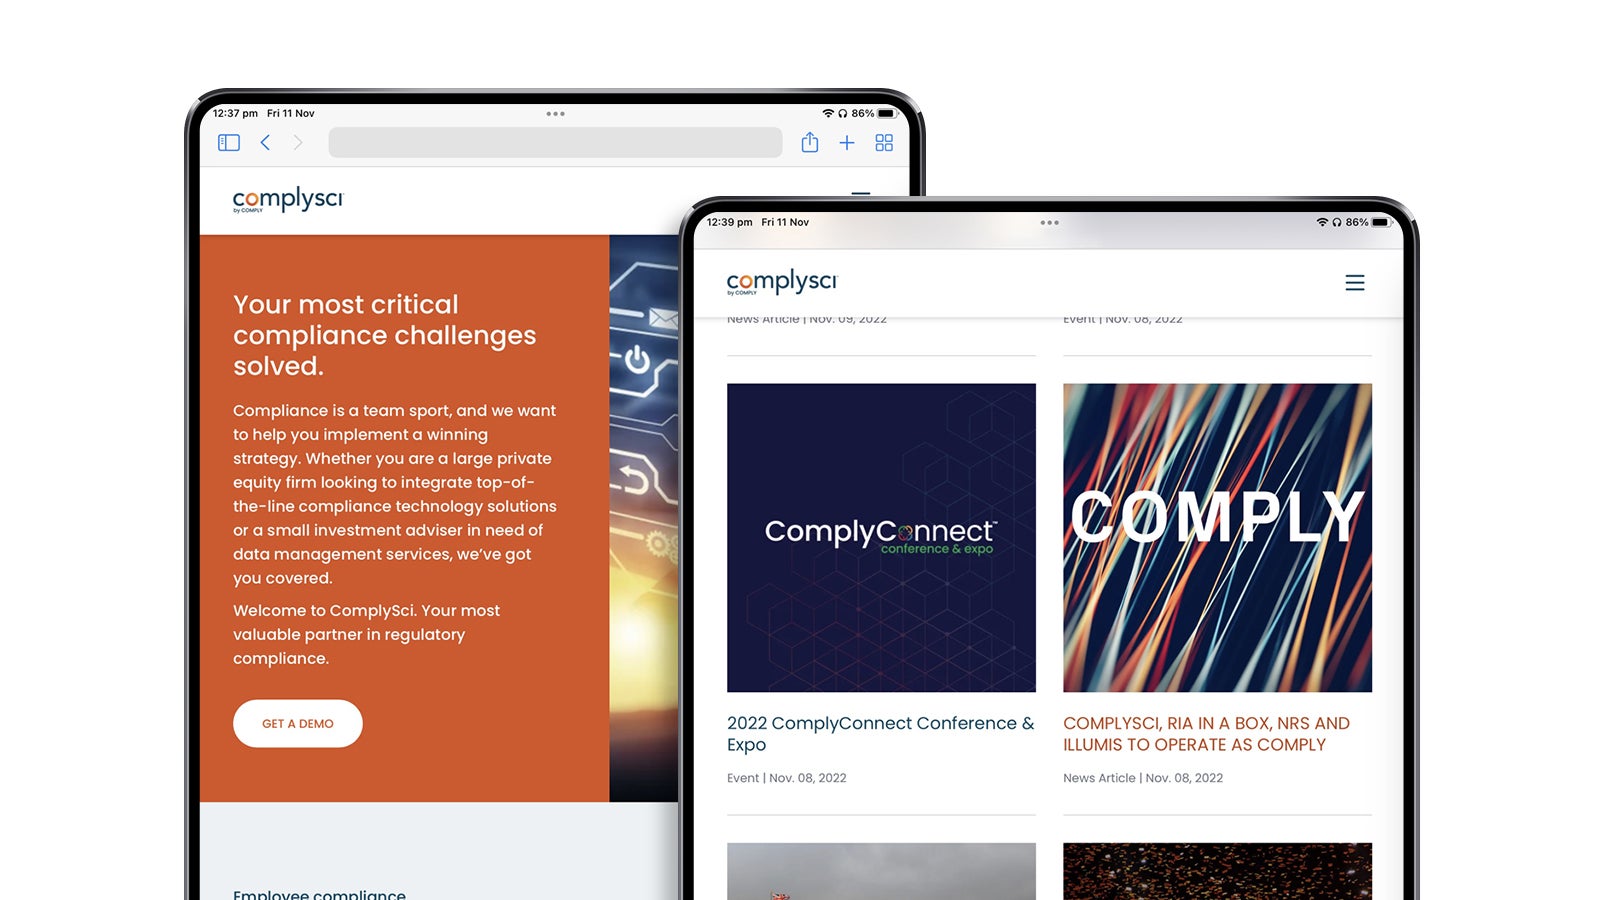 ComplySci | Responsive website shown on two tablets in portrait mode | Devotion